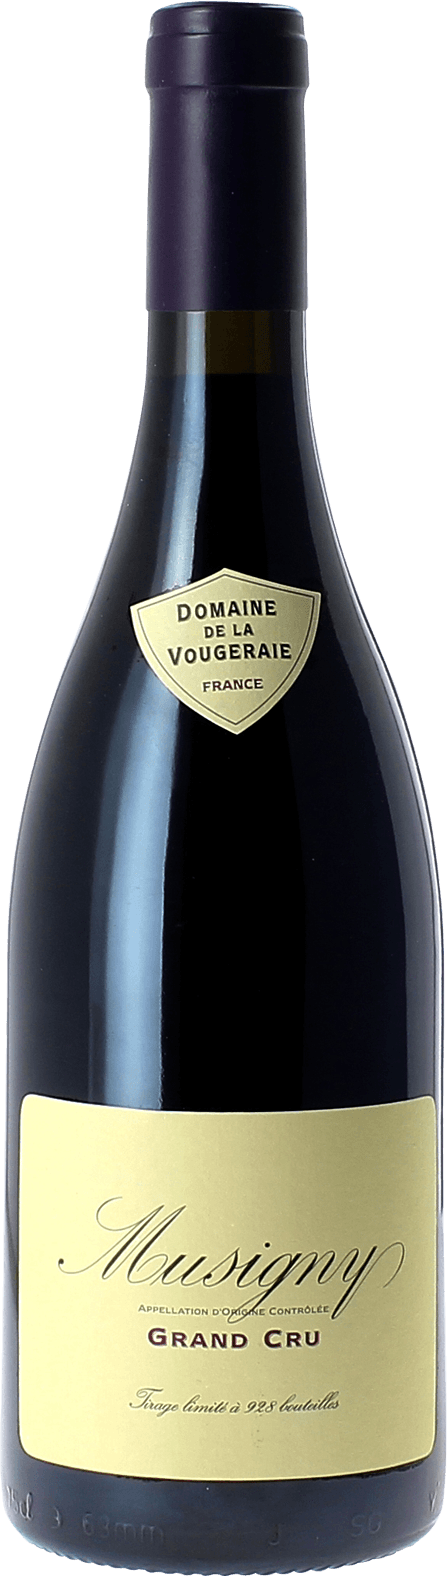 Musigny grand cru 2018 Domaine VOUGERAIE, Bourgogne rouge